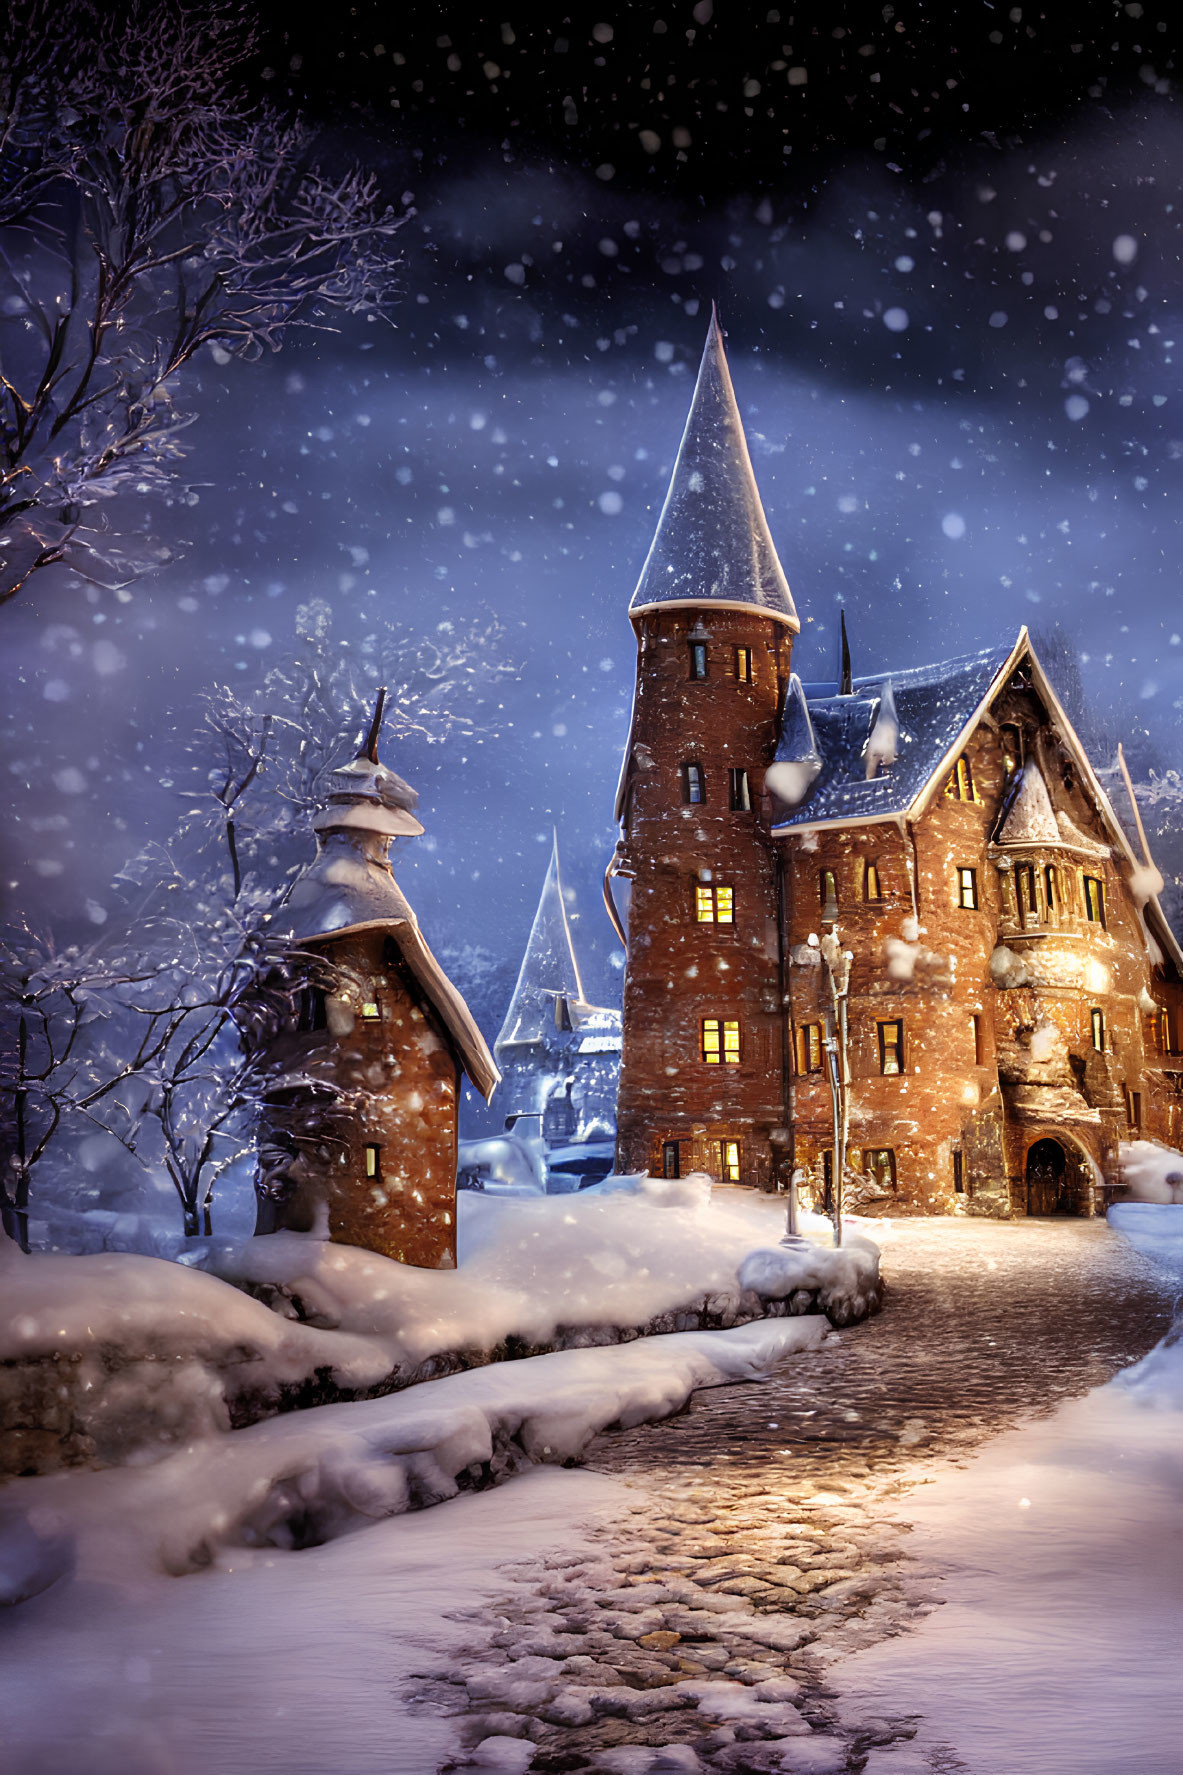 Snow-covered path to glowing castle under serene night sky